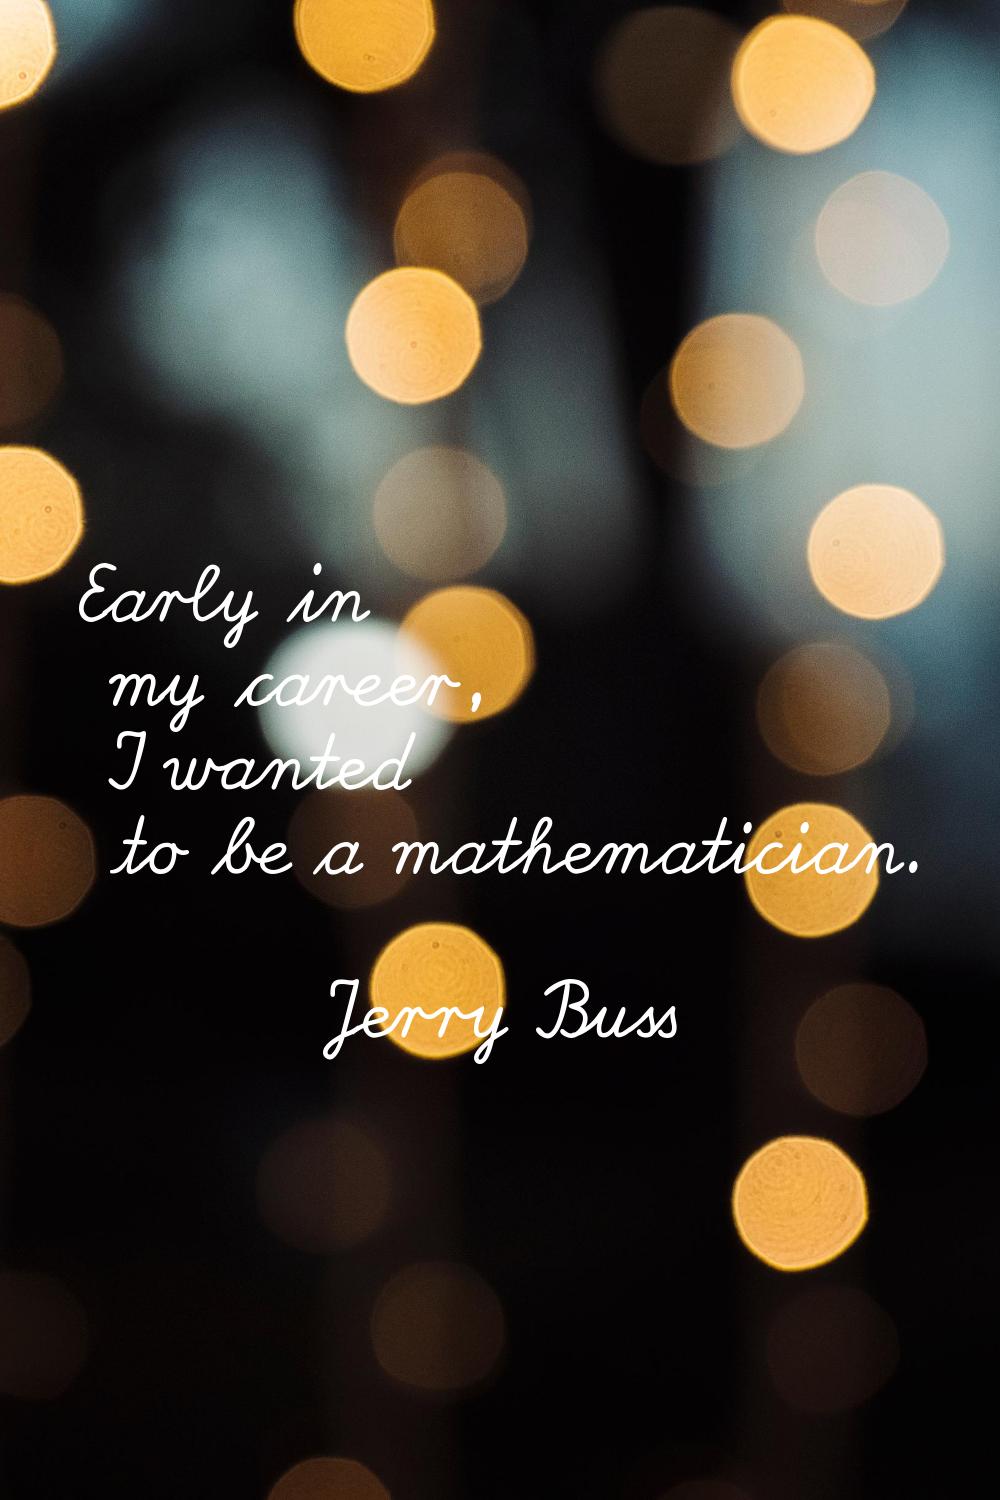 Early in my career, I wanted to be a mathematician.